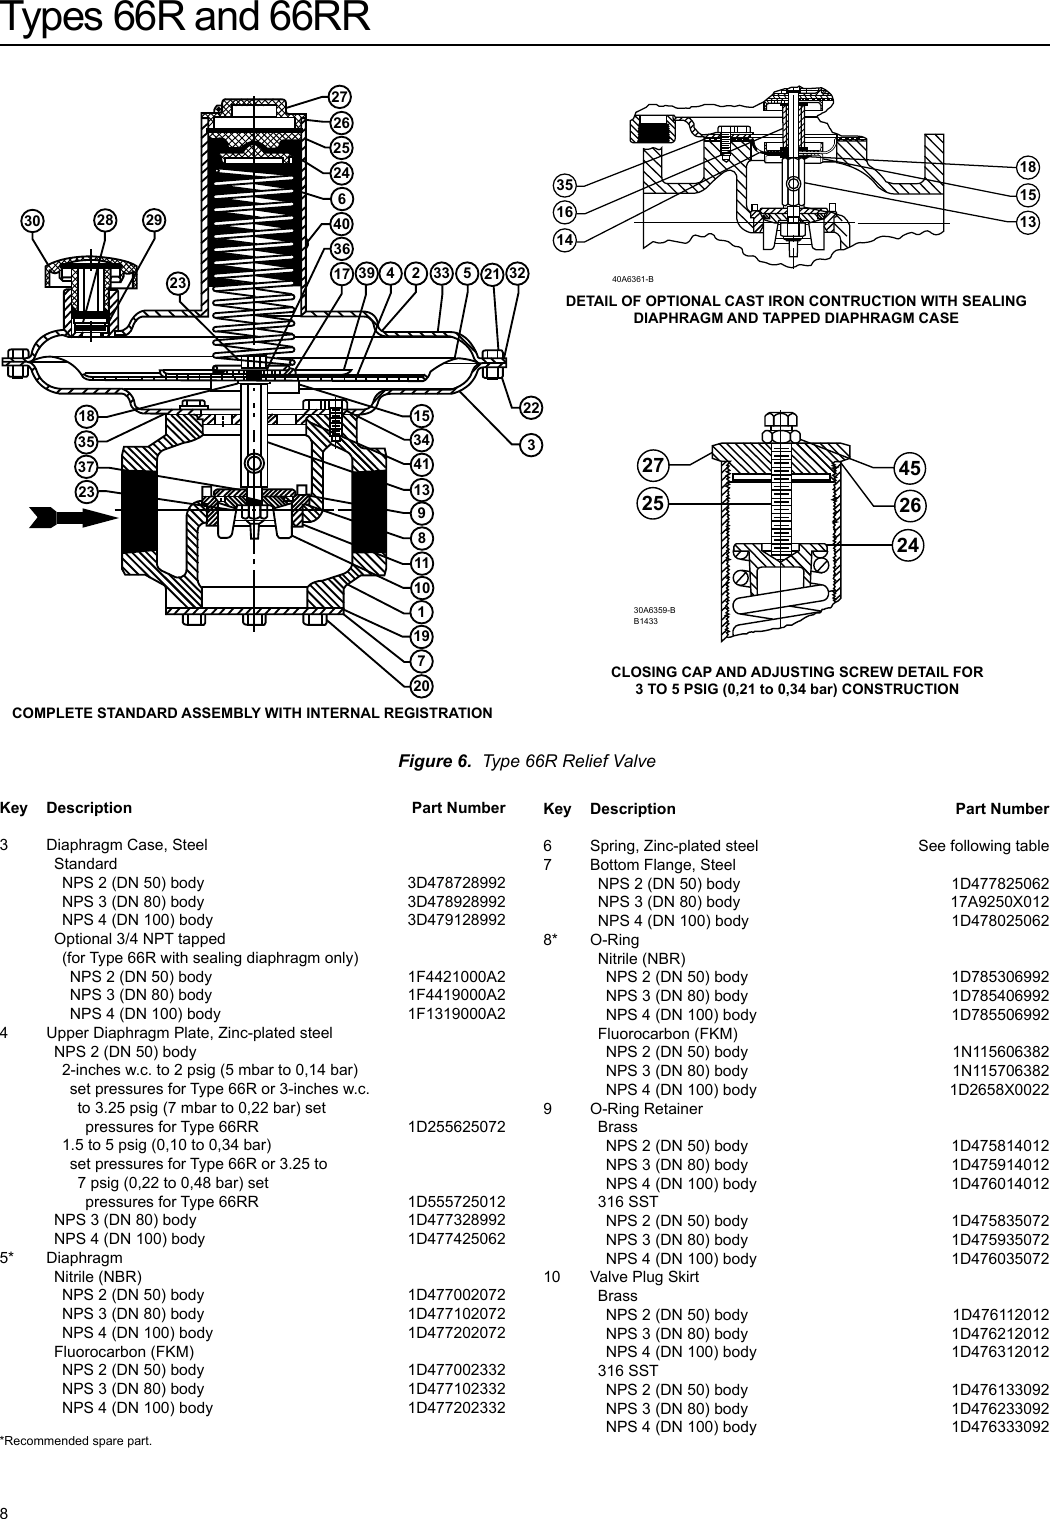 Page 8 of 12 - Emerson Emerson-66R-Series-Vapor-Recovery-Valves-Instruction-Manual-  Emerson-66r-series-vapor-recovery-valves-instruction-manual